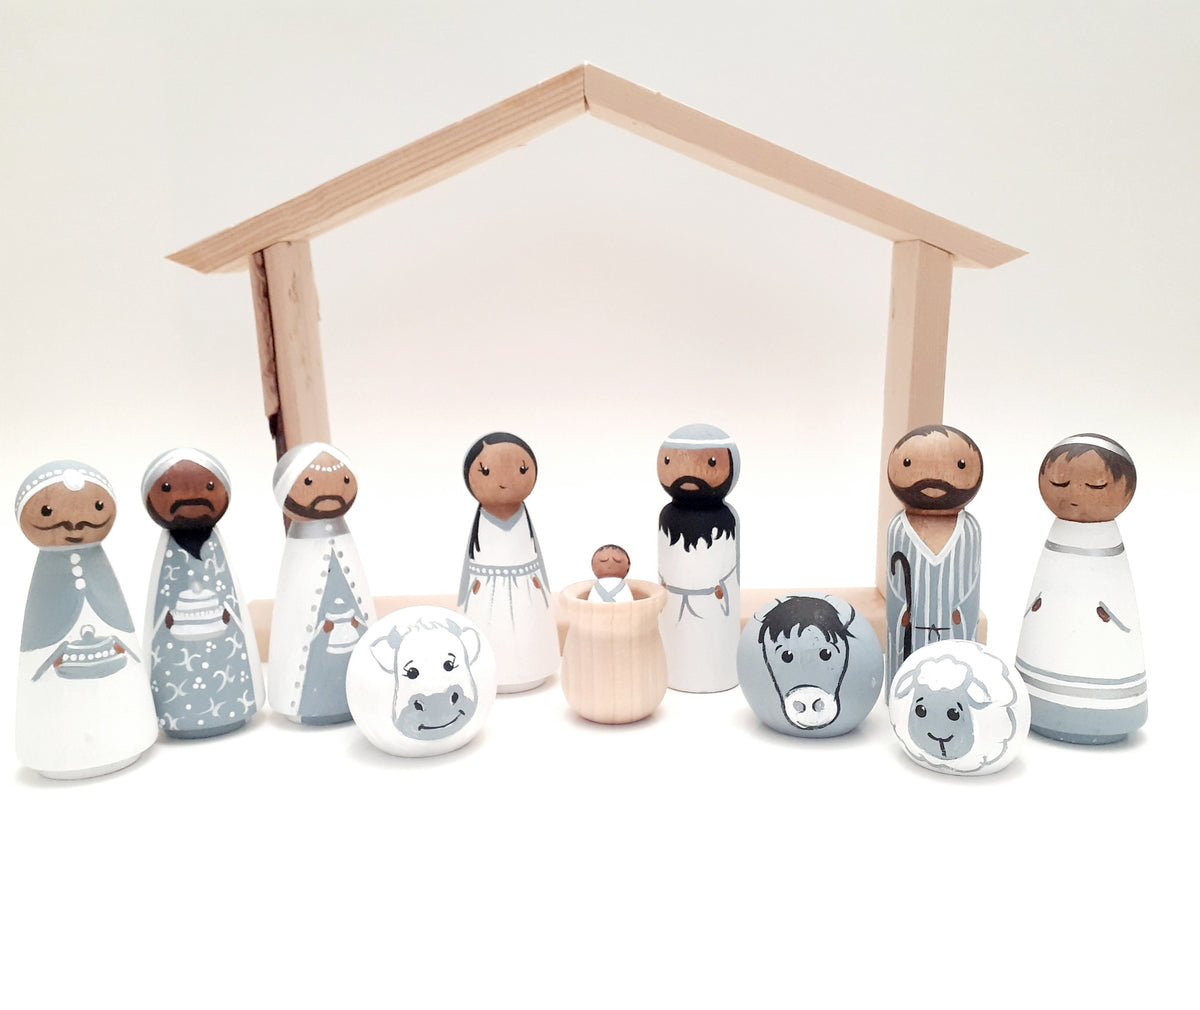 Wooden peg doll nativity scene set 13 pieces in white and grey and silver color palette 